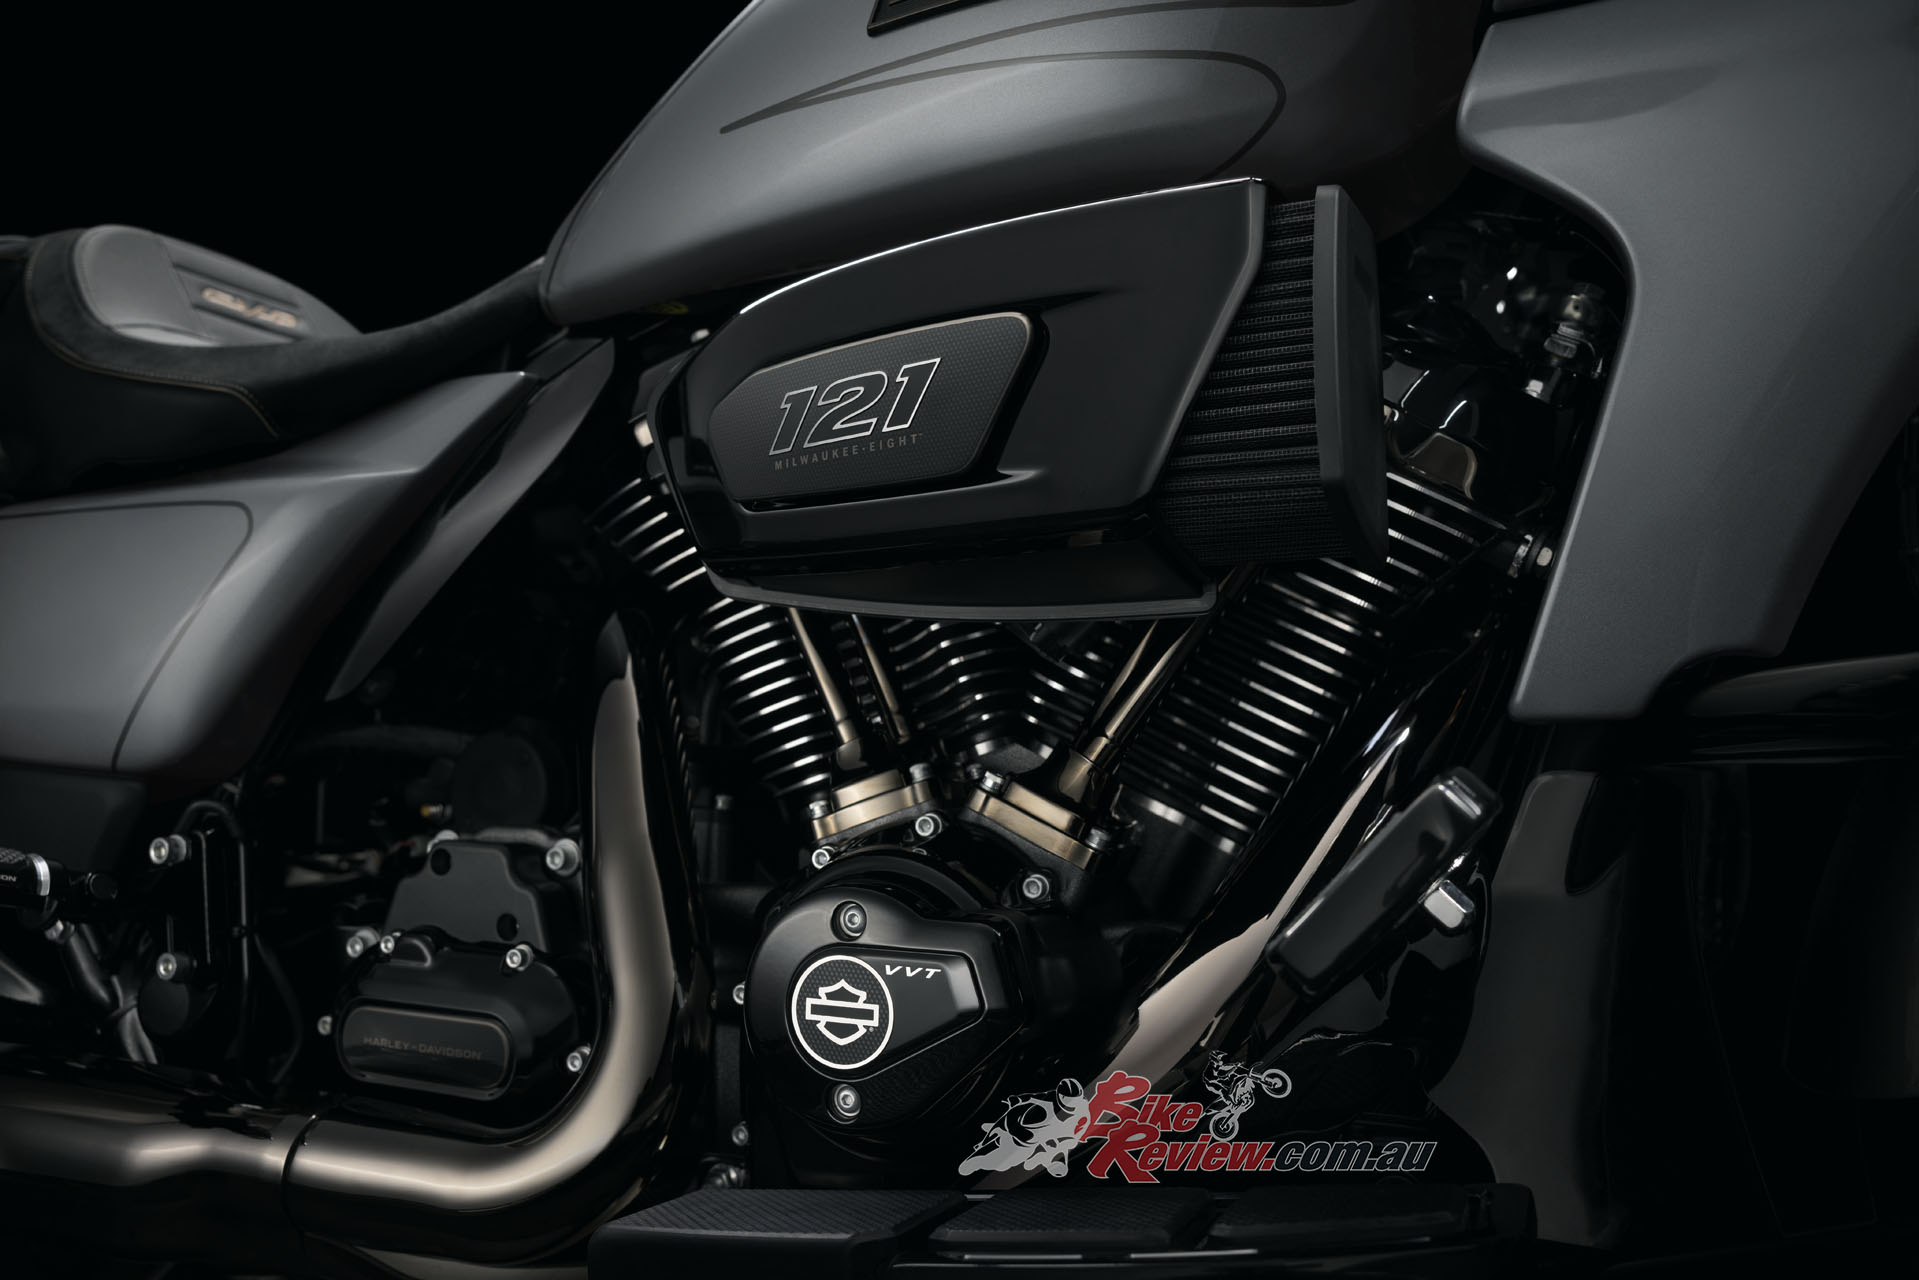 The bragging rights of riding a motorcycle powered by the new Milwaukee-Eight VVT 121 powertrain are exclusive to owners of the 2023 CVO Street Glide and CVO Road Glide models.